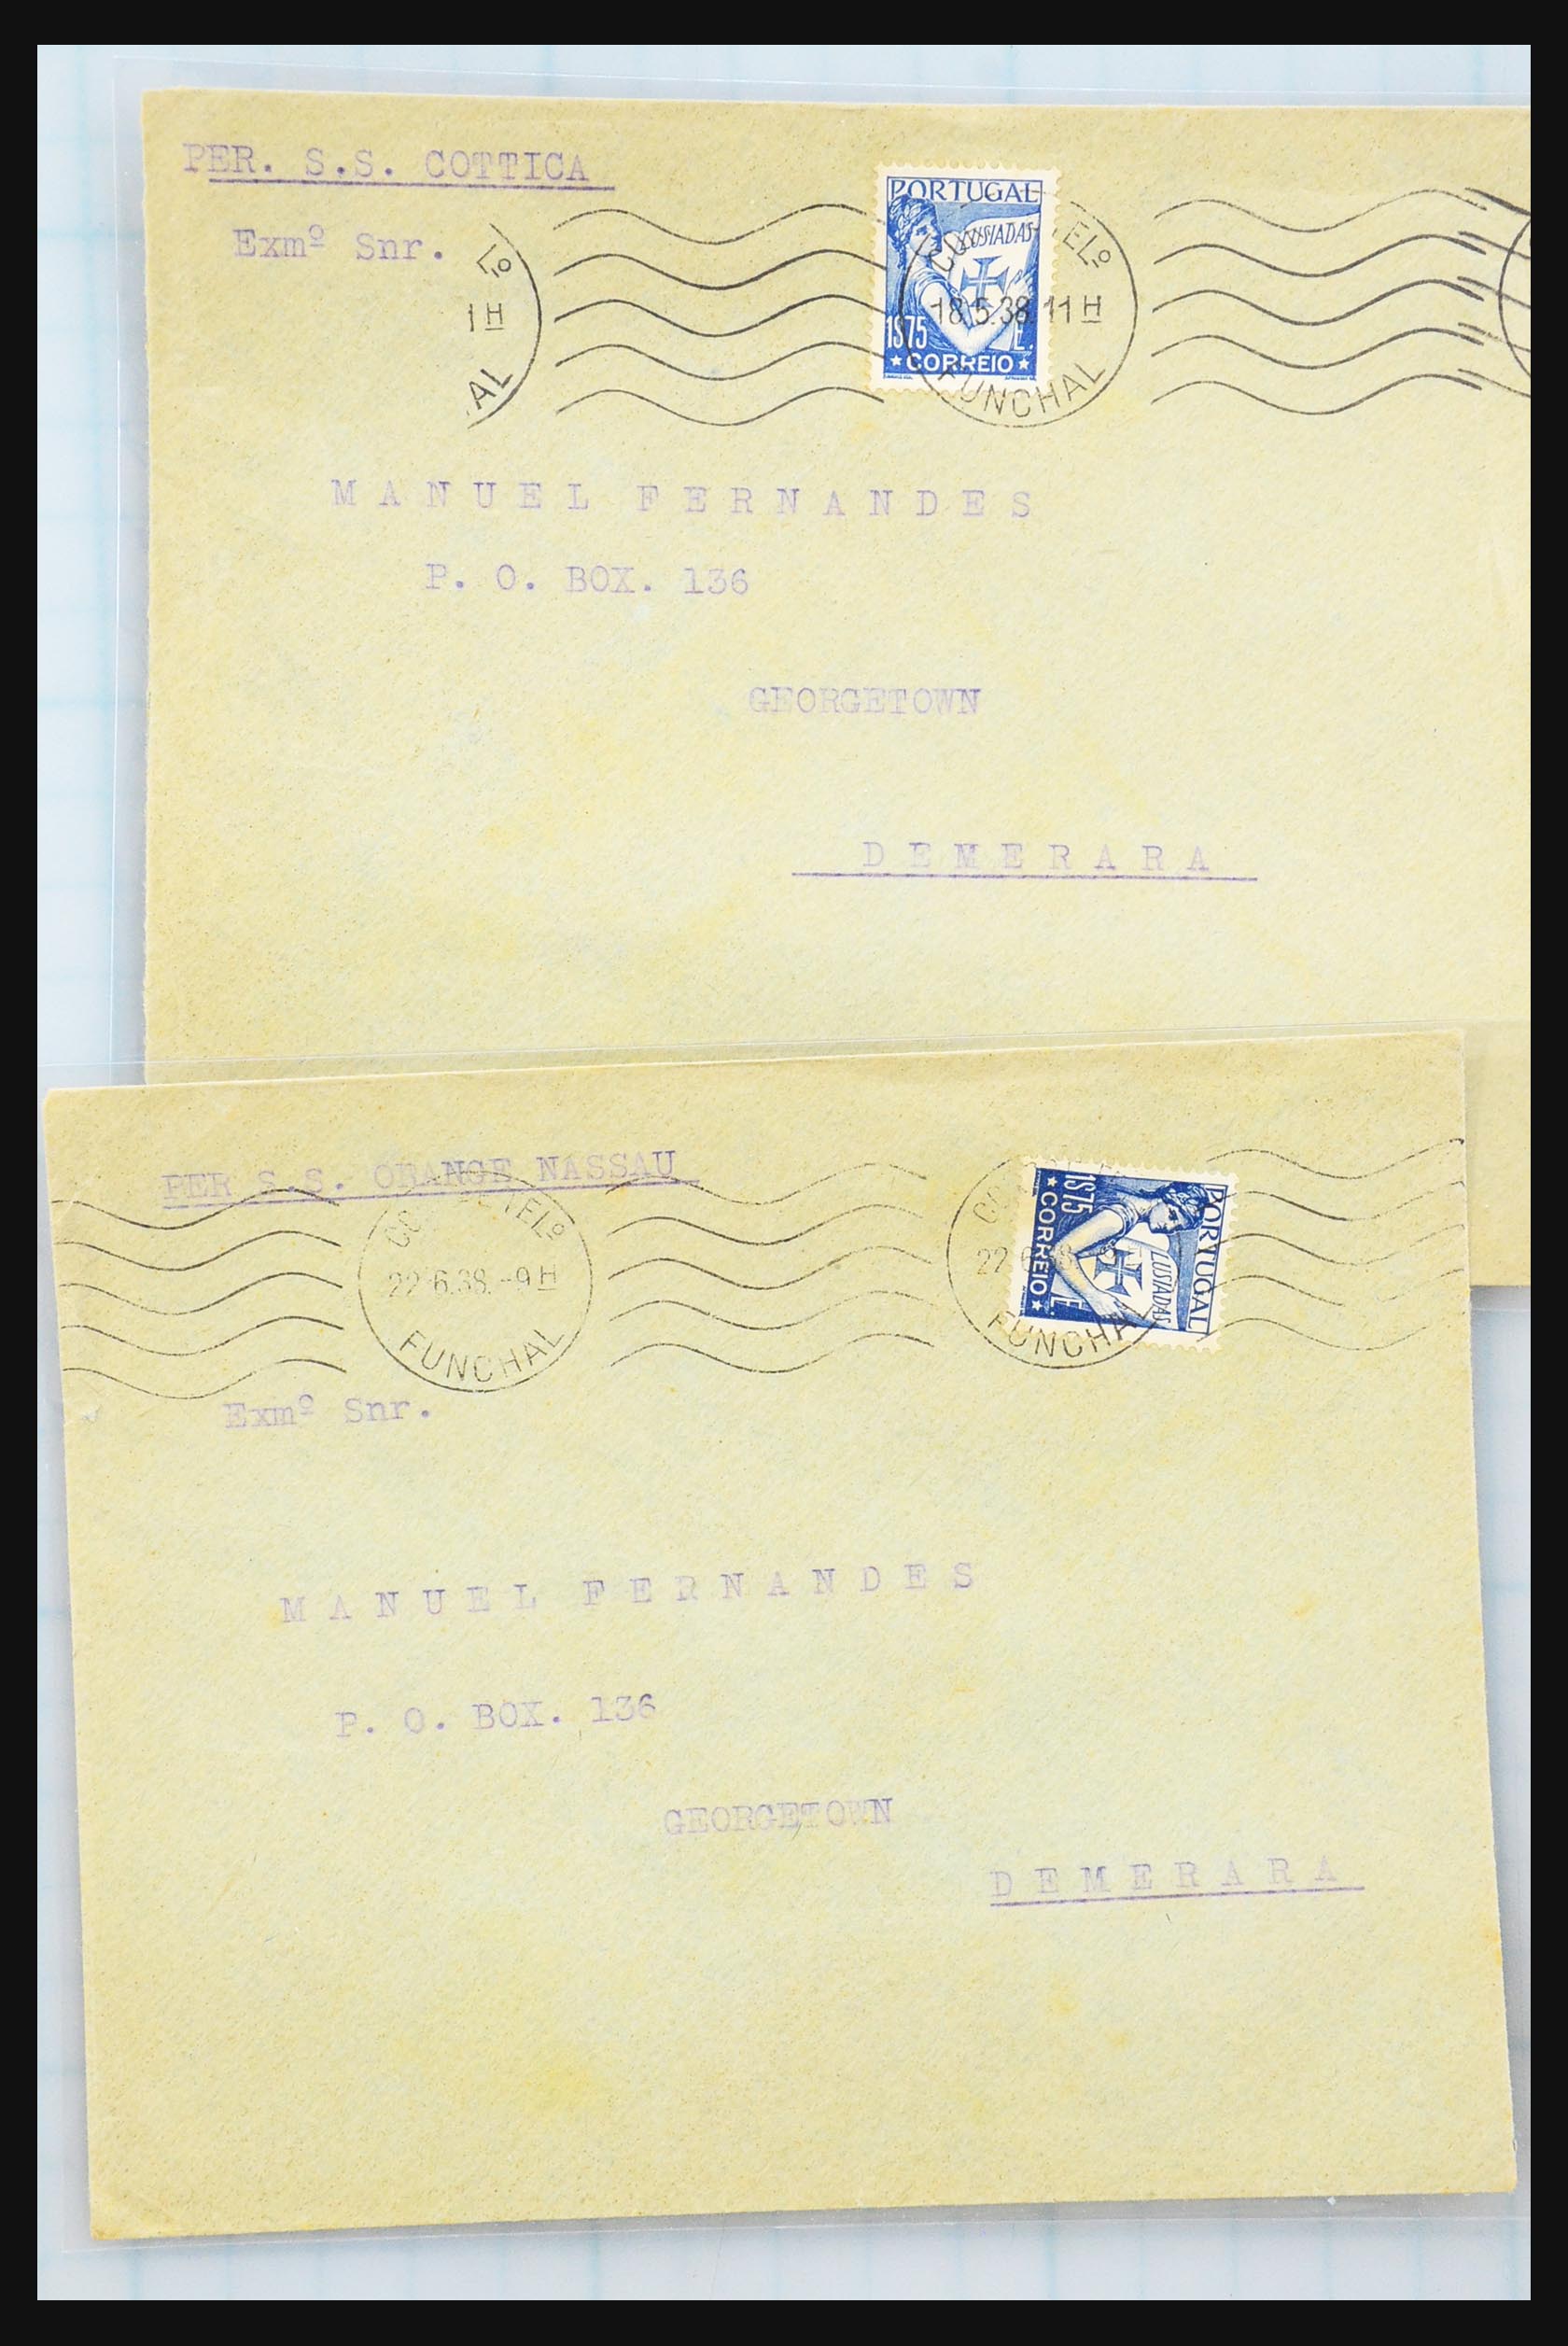 31358 258 - 31358 Portugal/Luxemburg/Greece covers 1880-1960.